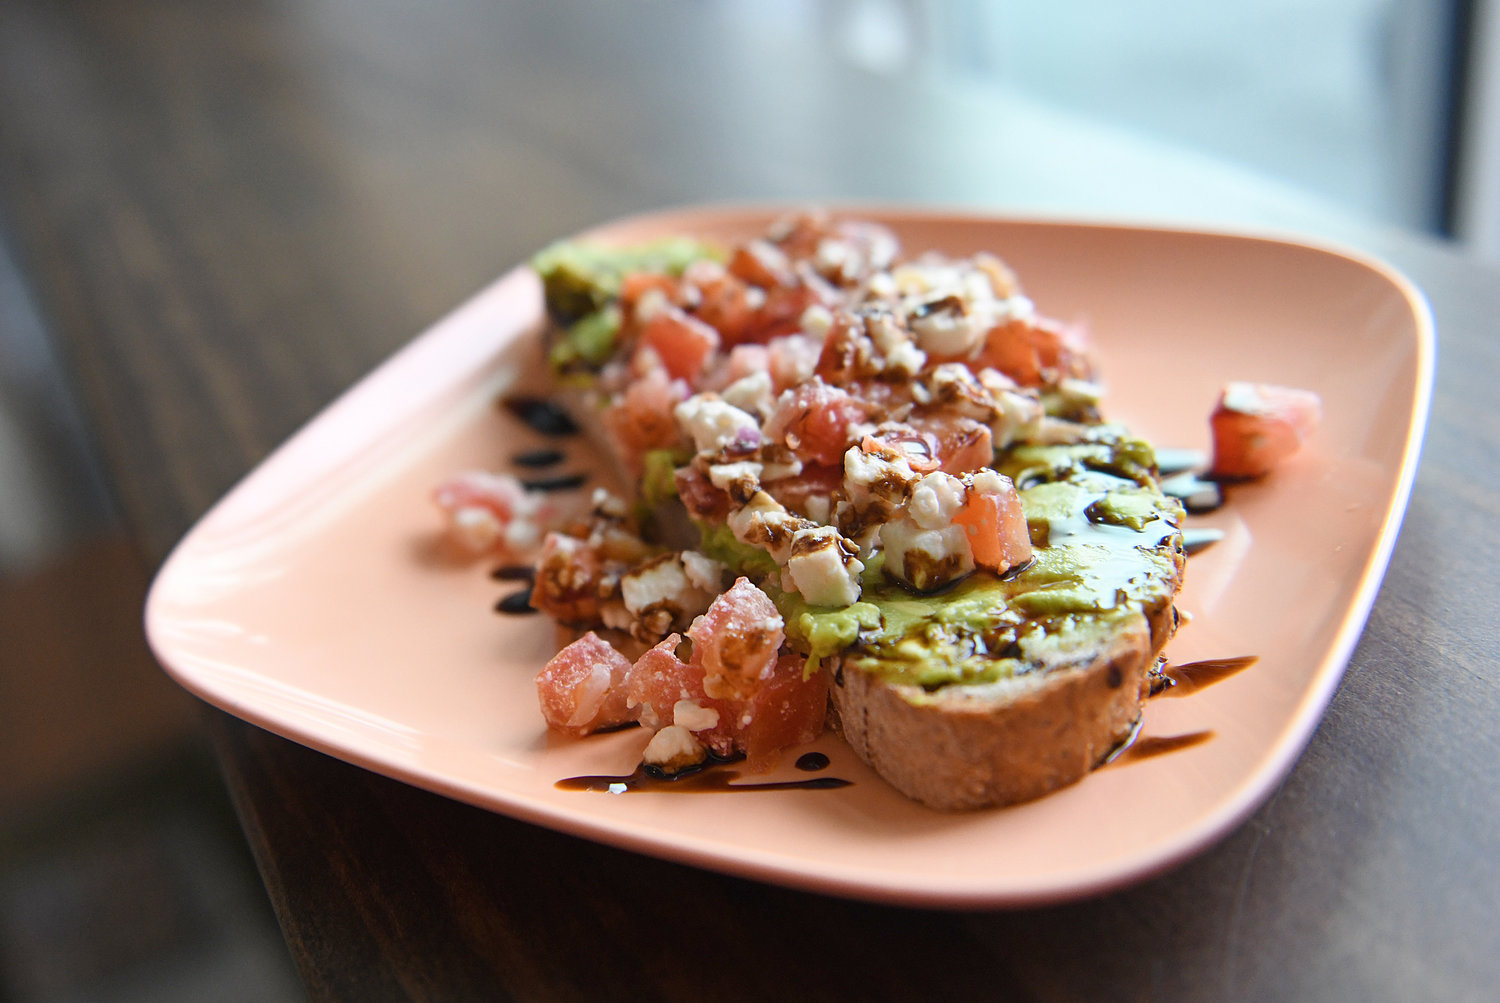 Savory toasts are topped with seasonal flavors